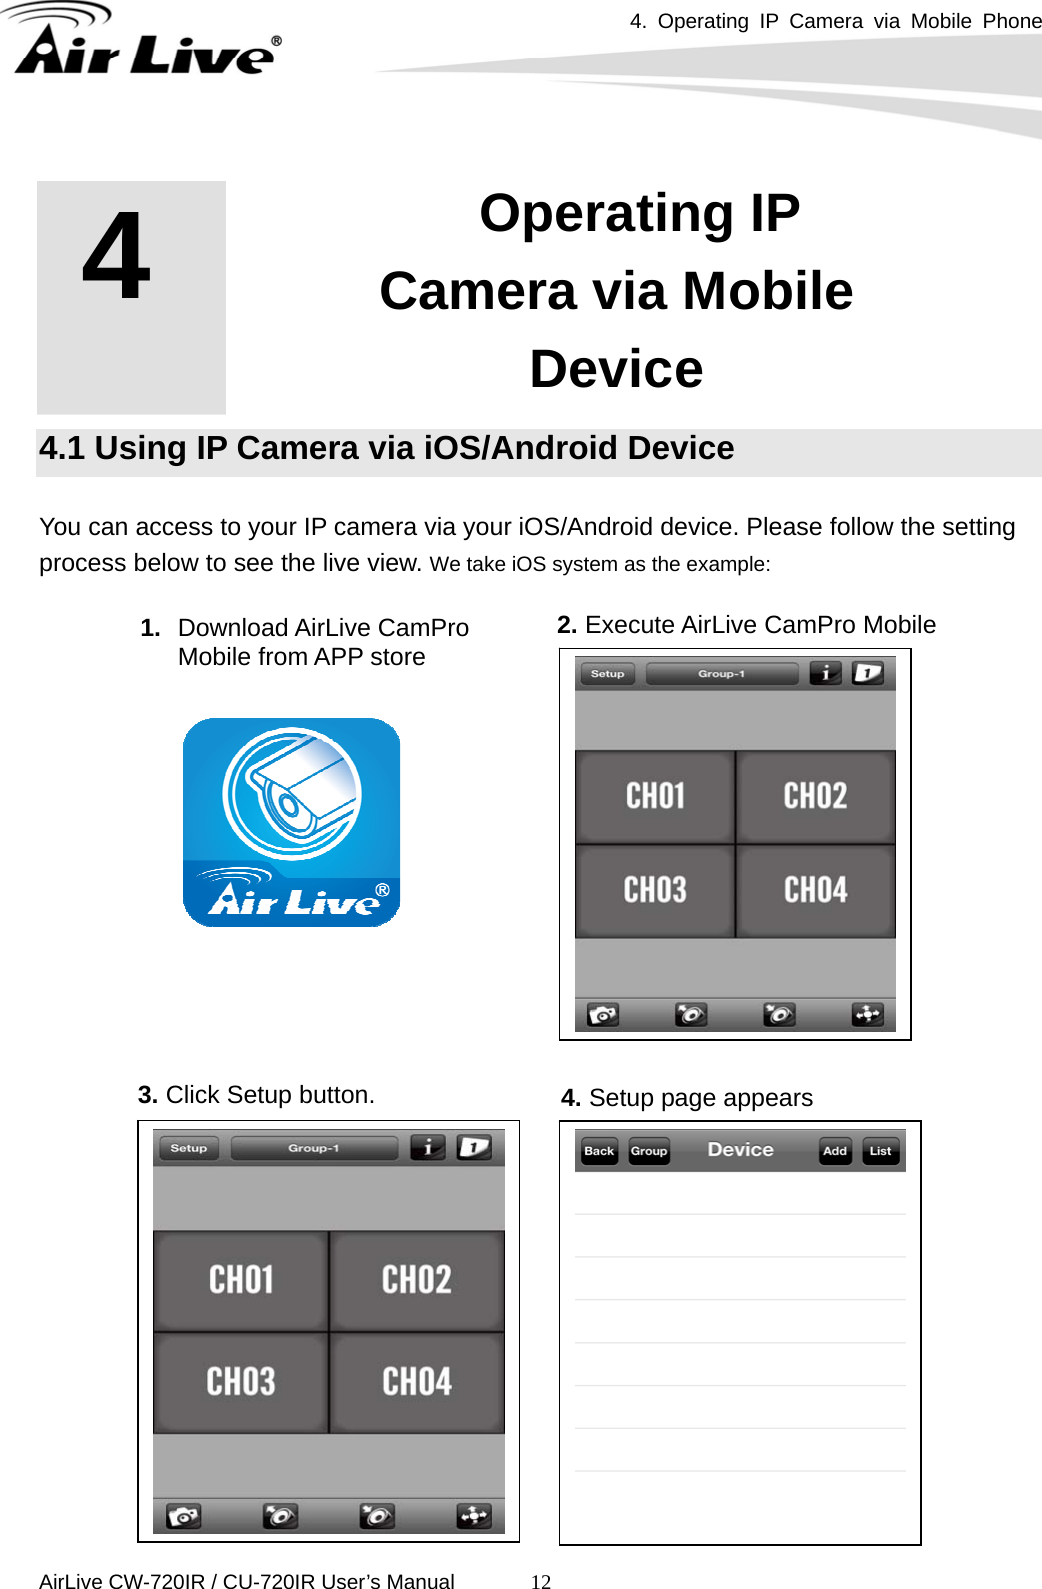 4. Operating IP Camera via Mobile Phone      AirLive CW-720IR / CU-720IR User’s Manual 12     4.1 Using IP Camera via iOS/Android Device  You can access to your IP camera via your iOS/Android device. Please follow the setting process below to see the live view. We take iOS system as the example:                4   4. Operating IP Camera via Mobile Device 1.  Download AirLive CamPro Mobile from APP store 2. Execute AirLive CamPro Mobile 3. Click Setup button.  4. Setup page appears  